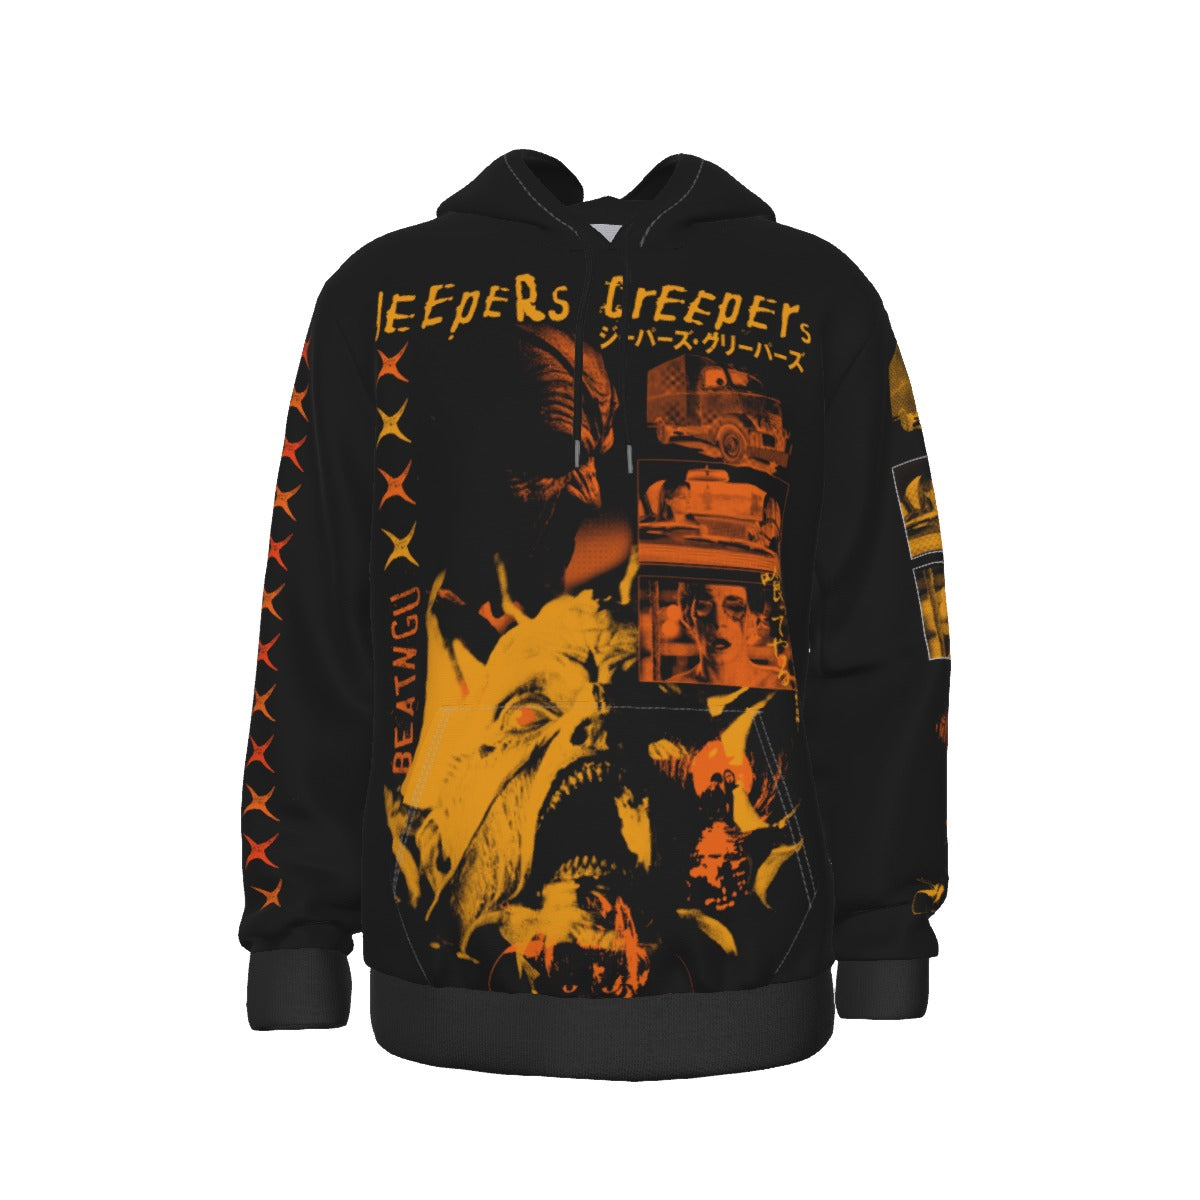 Creepers All-Over Print Men's Thicken Pullover Hoodie